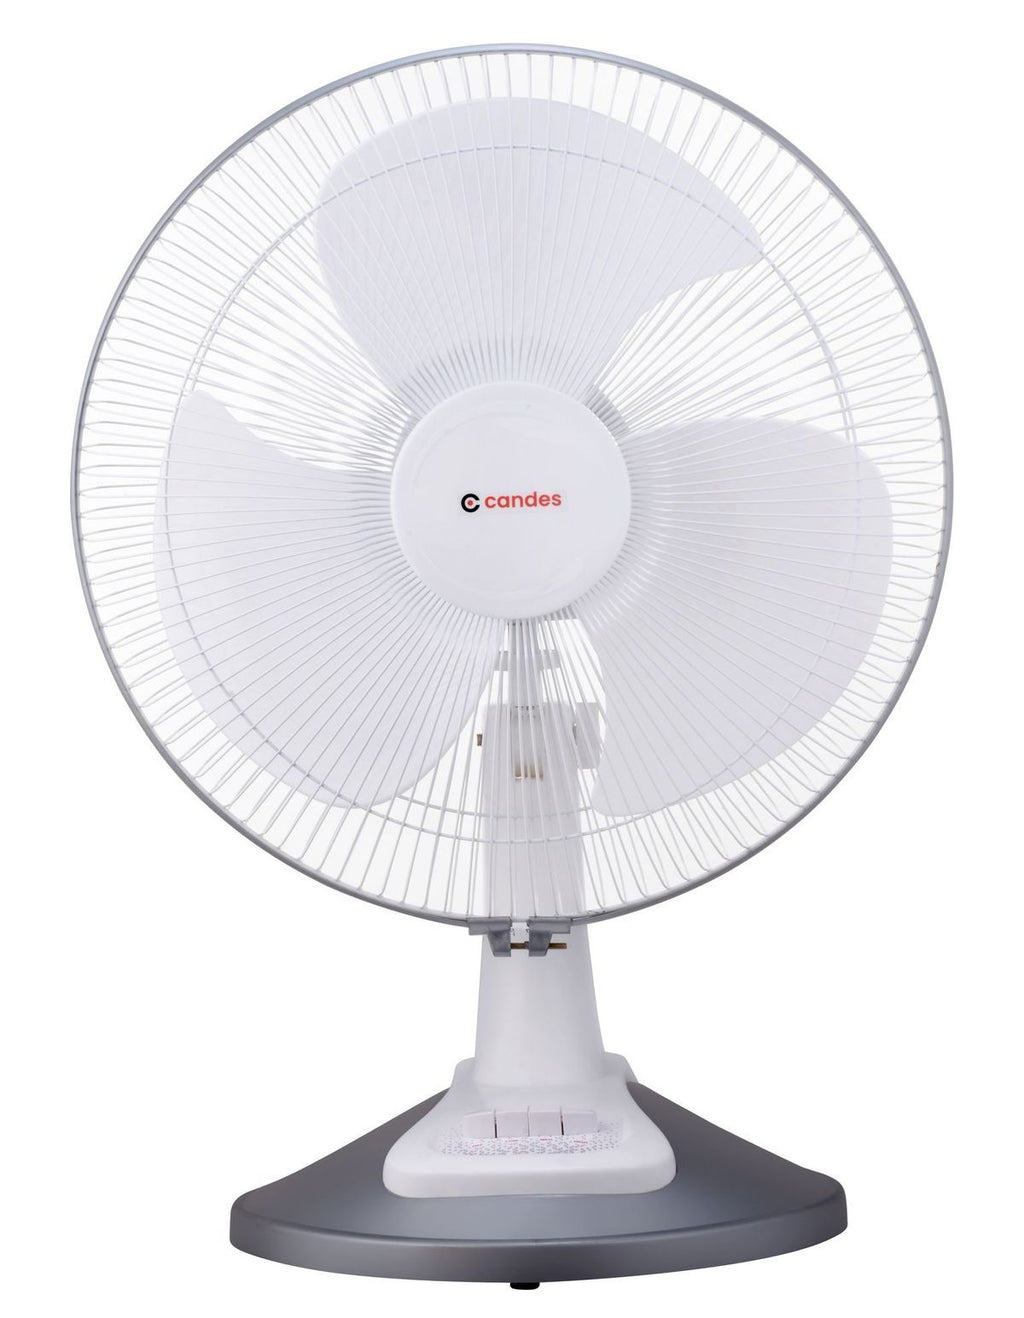 Candes Desker Table Fan for Cooling with Automatic Oscillation